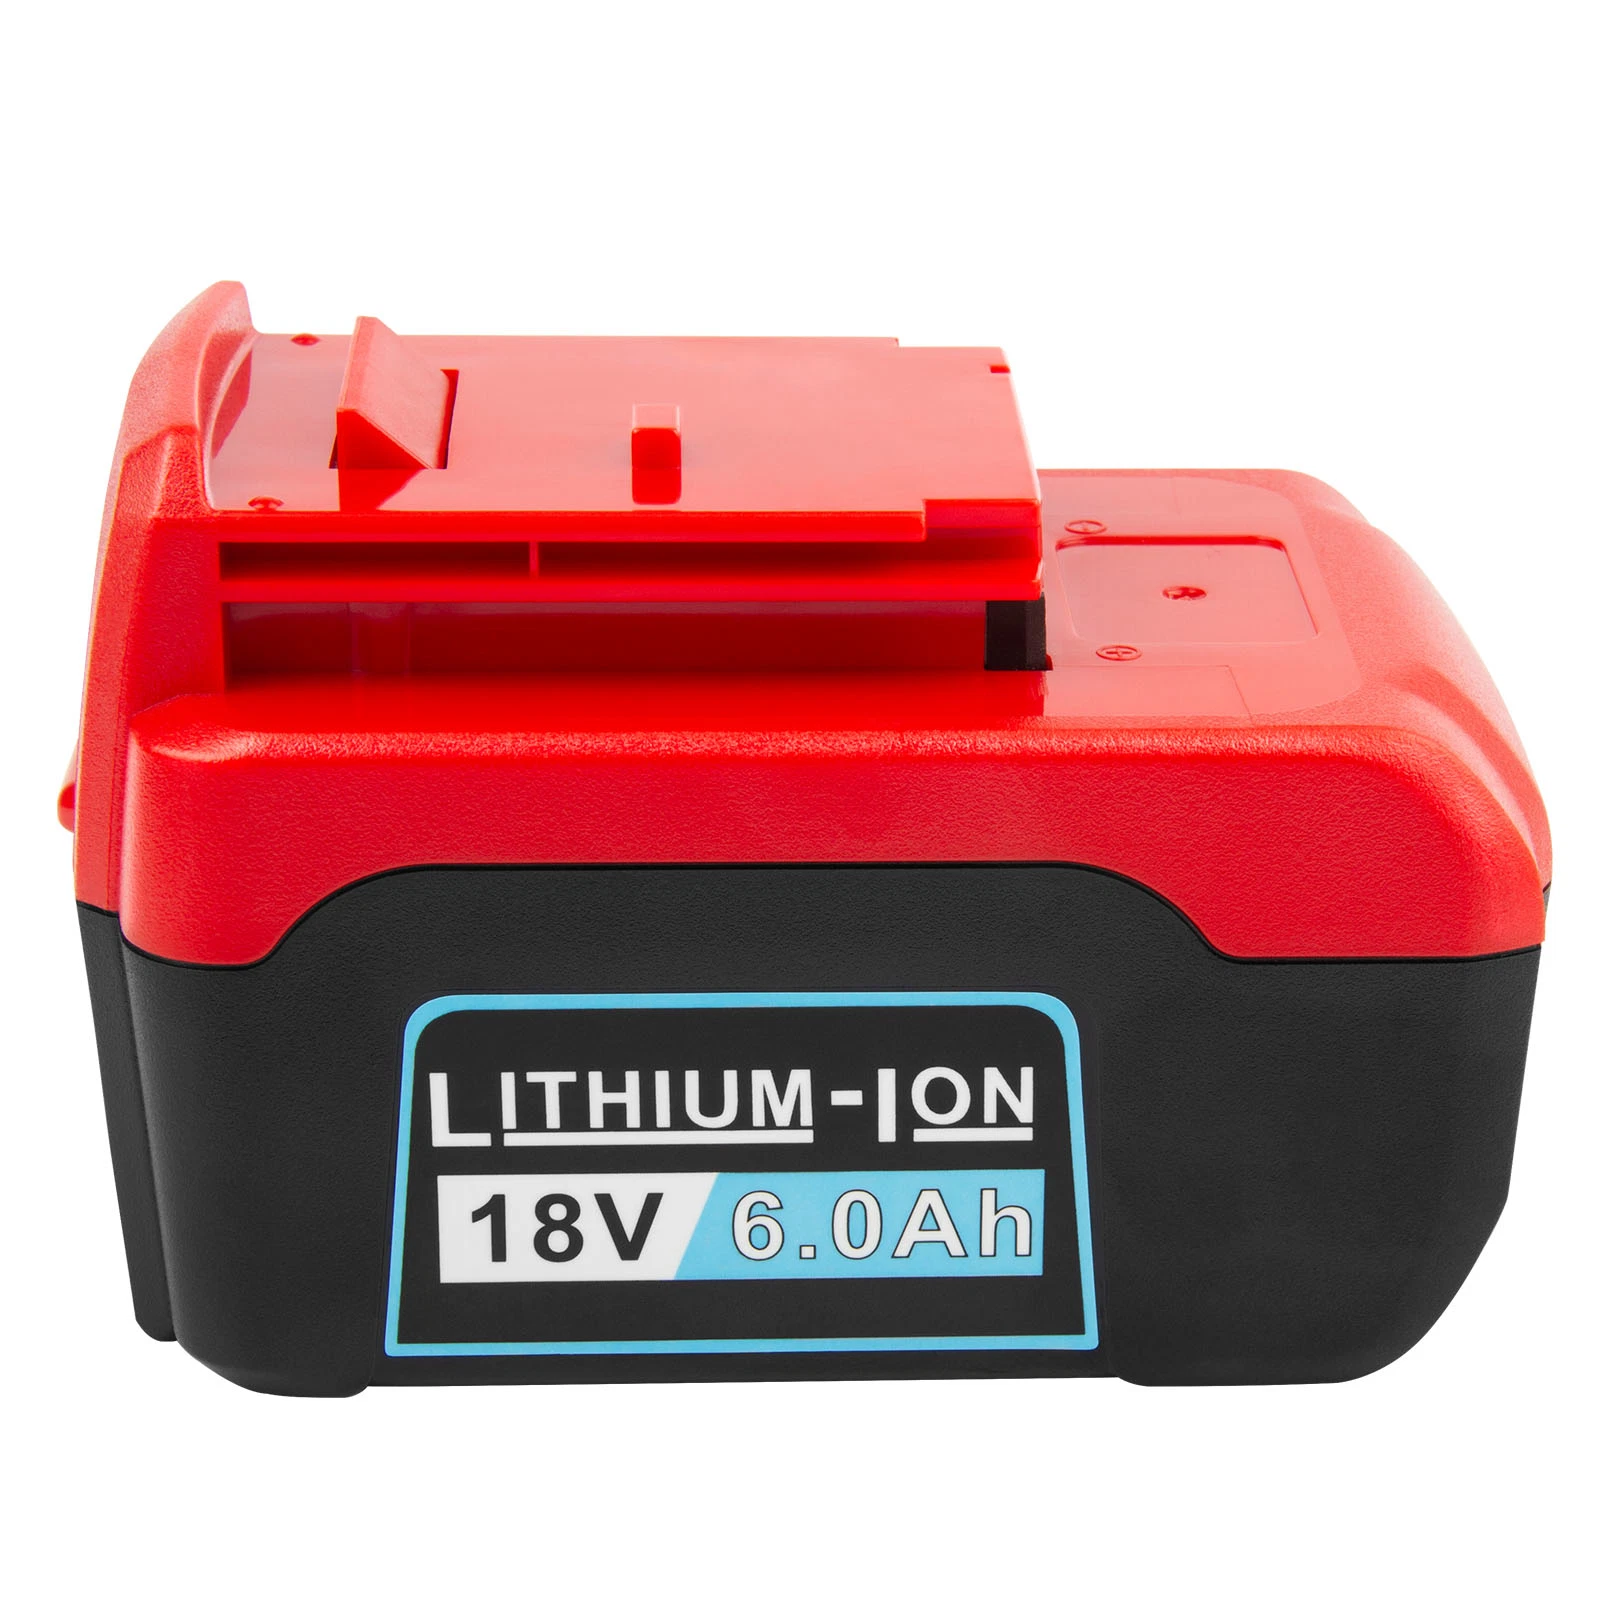 Hot Selling Rechargeable Lithium Battery Porter Cable PC18b 18V 6000mAh Li-ion Battery Replacement for Cordless Power Drill Power Tools